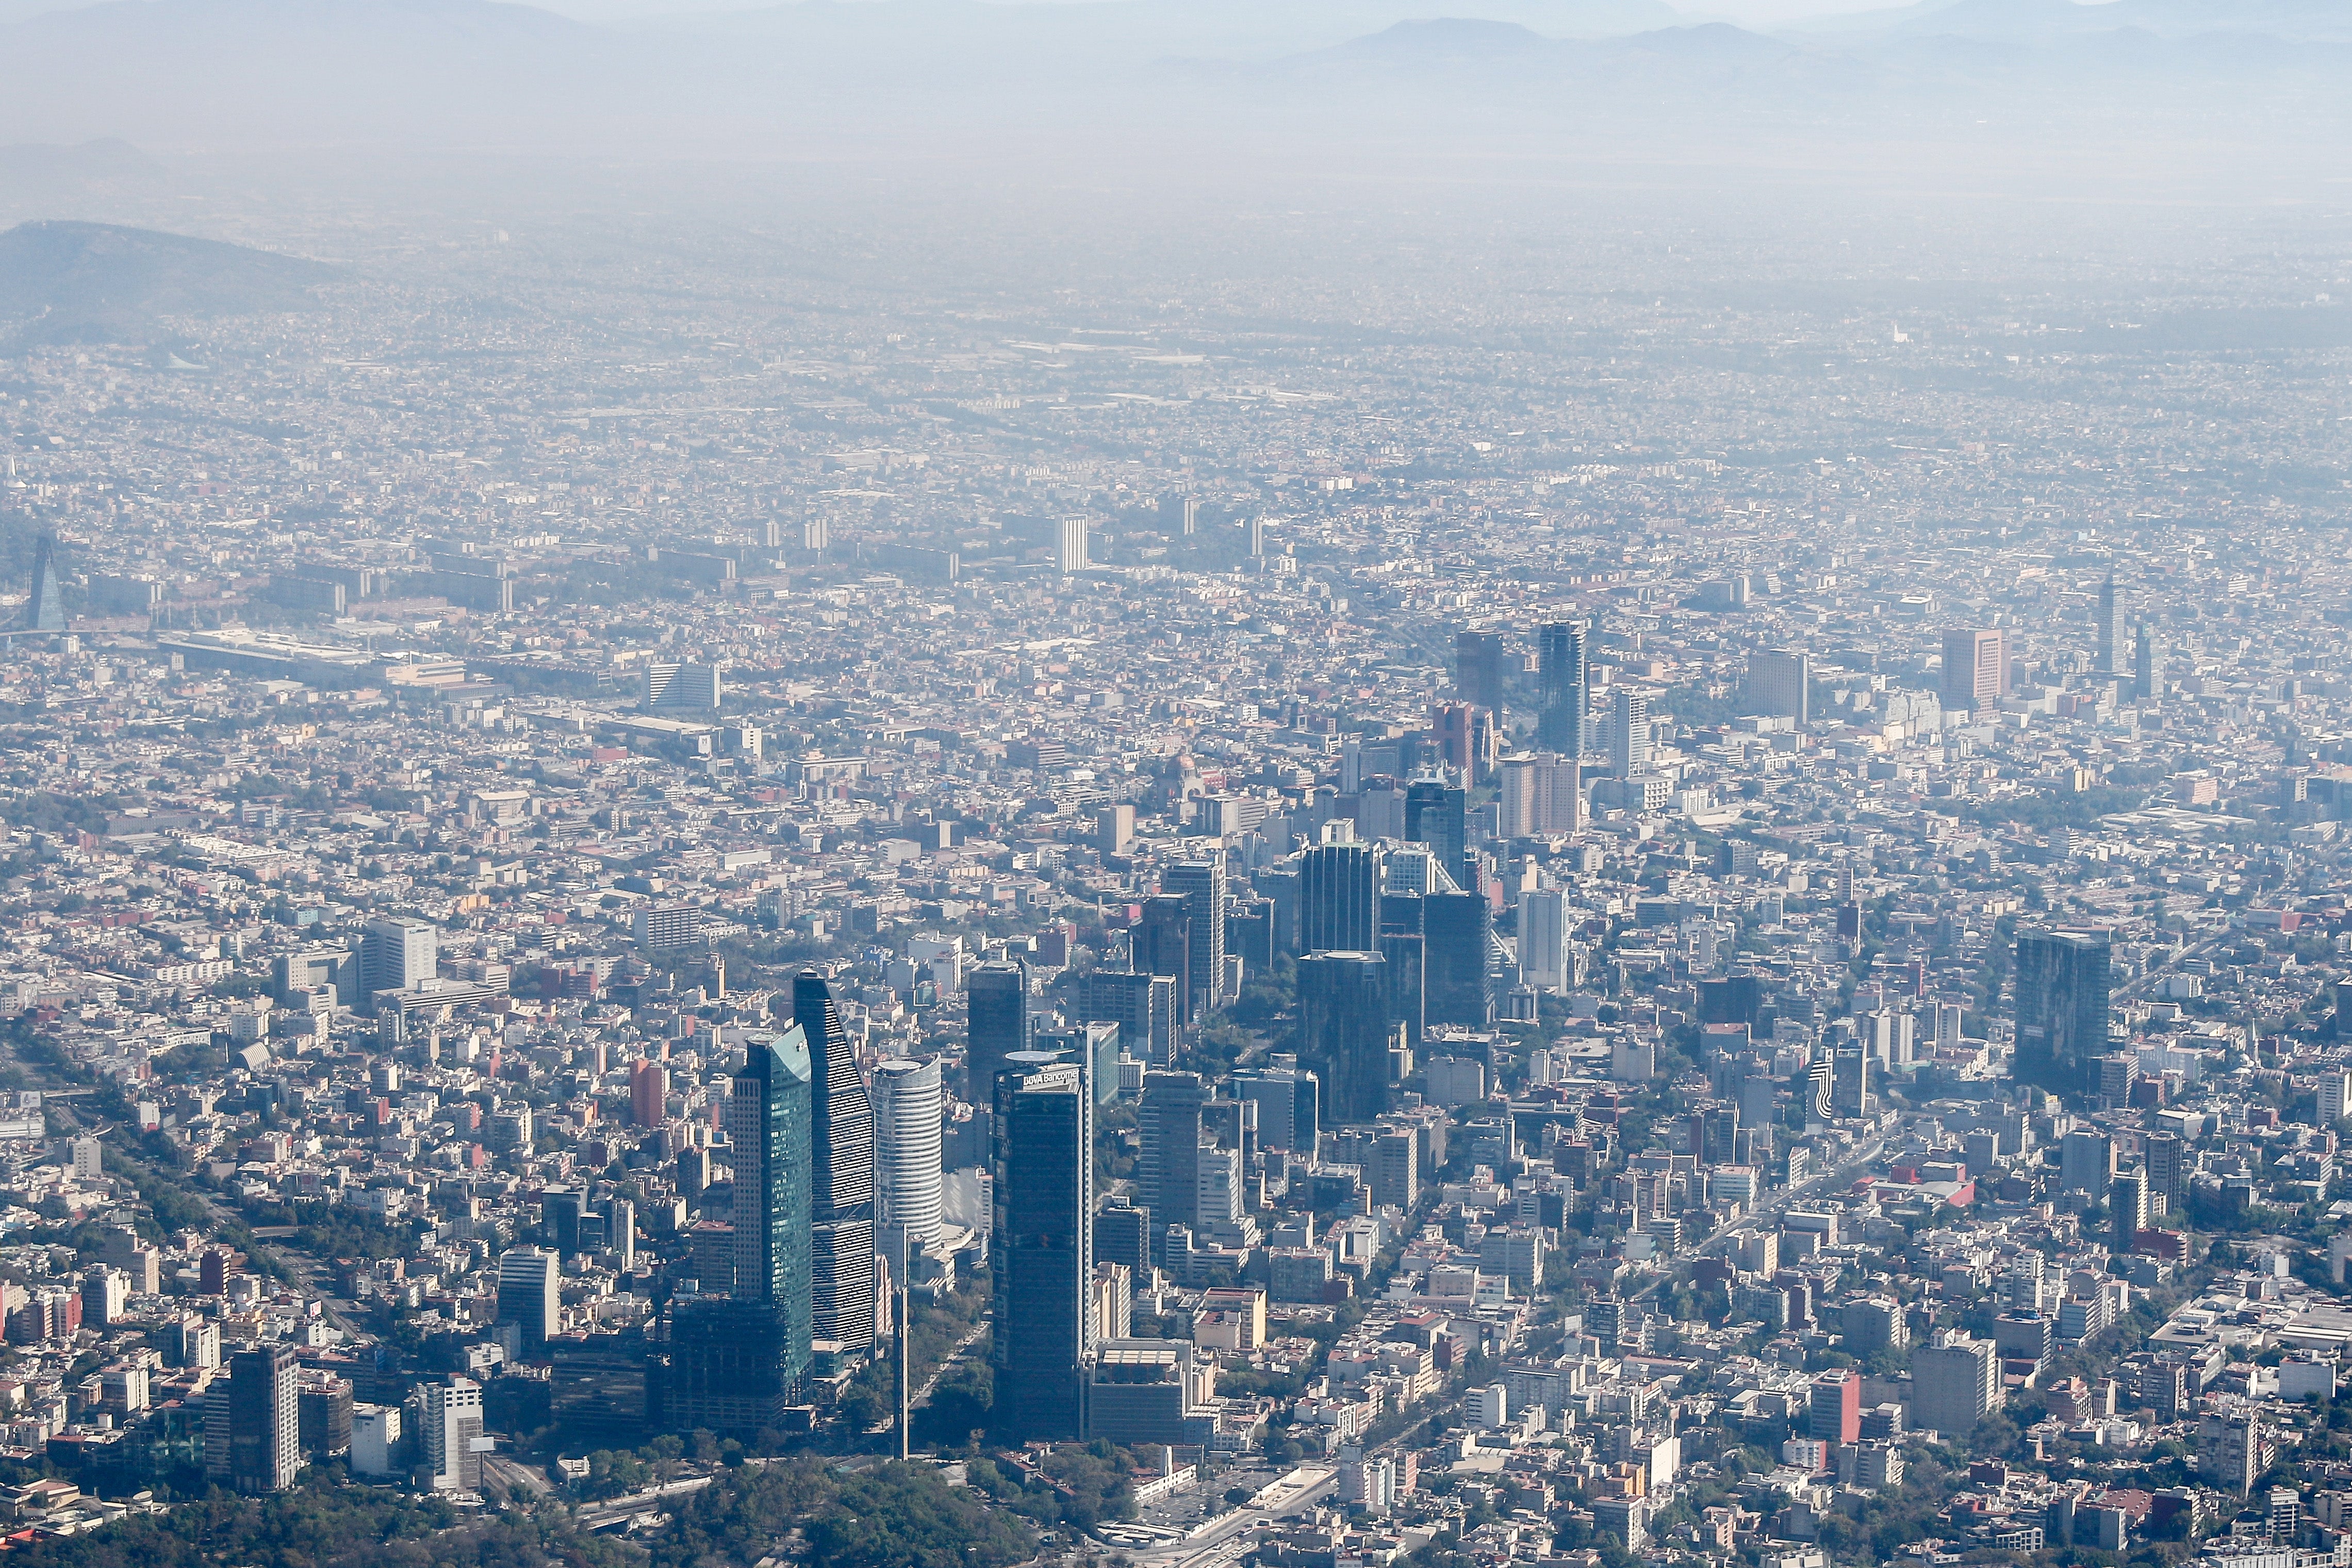 An aerial view of city clouded by smog.